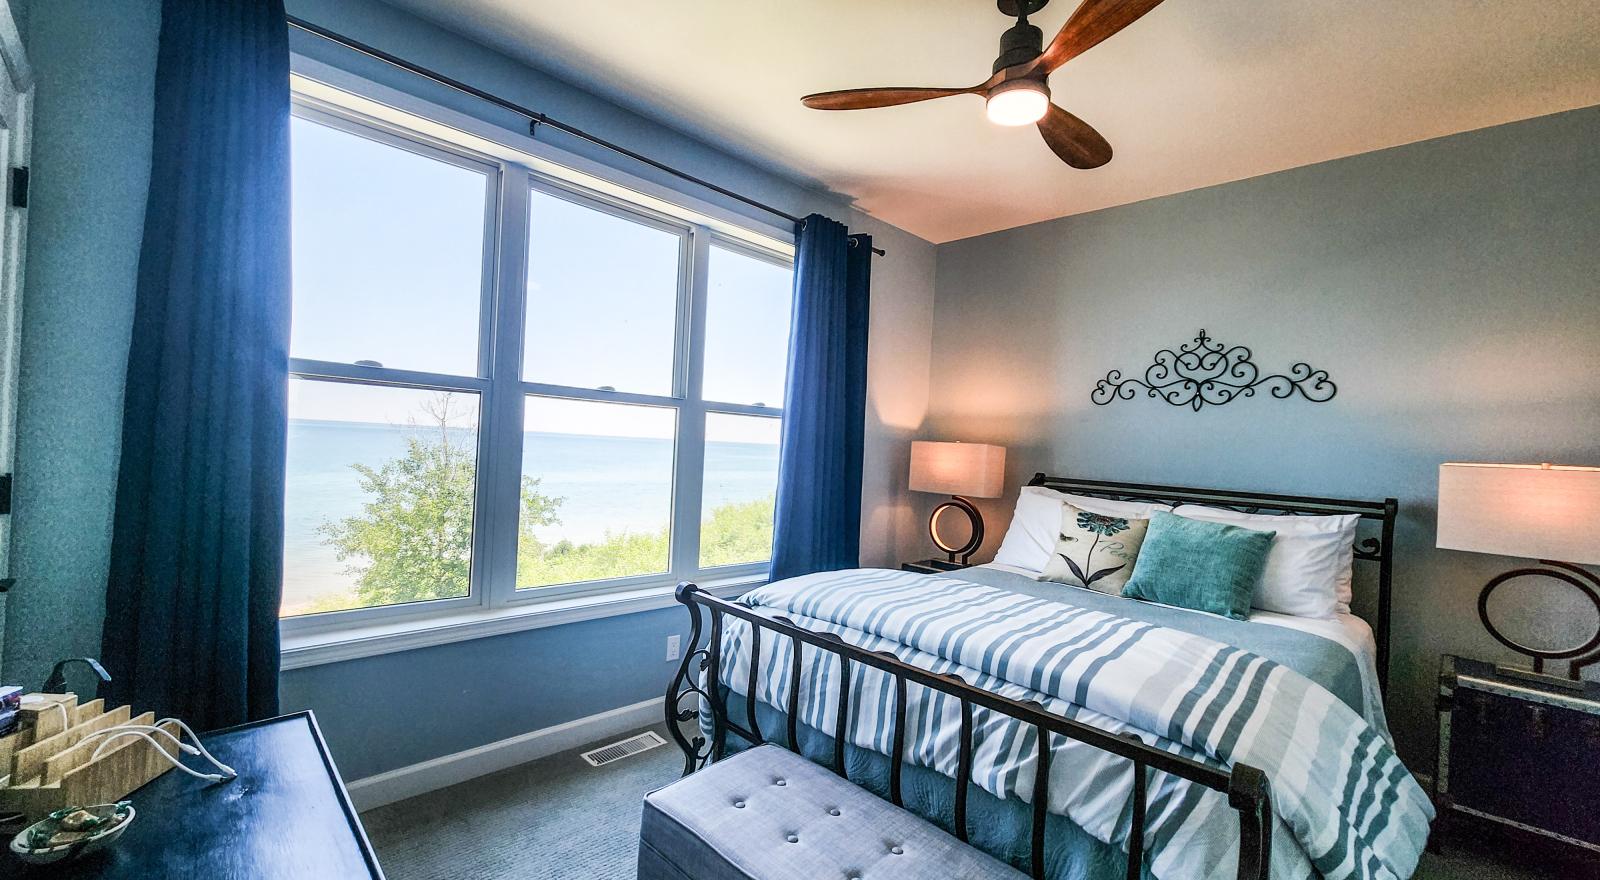 Superior room has queen bed and panoramic lake view